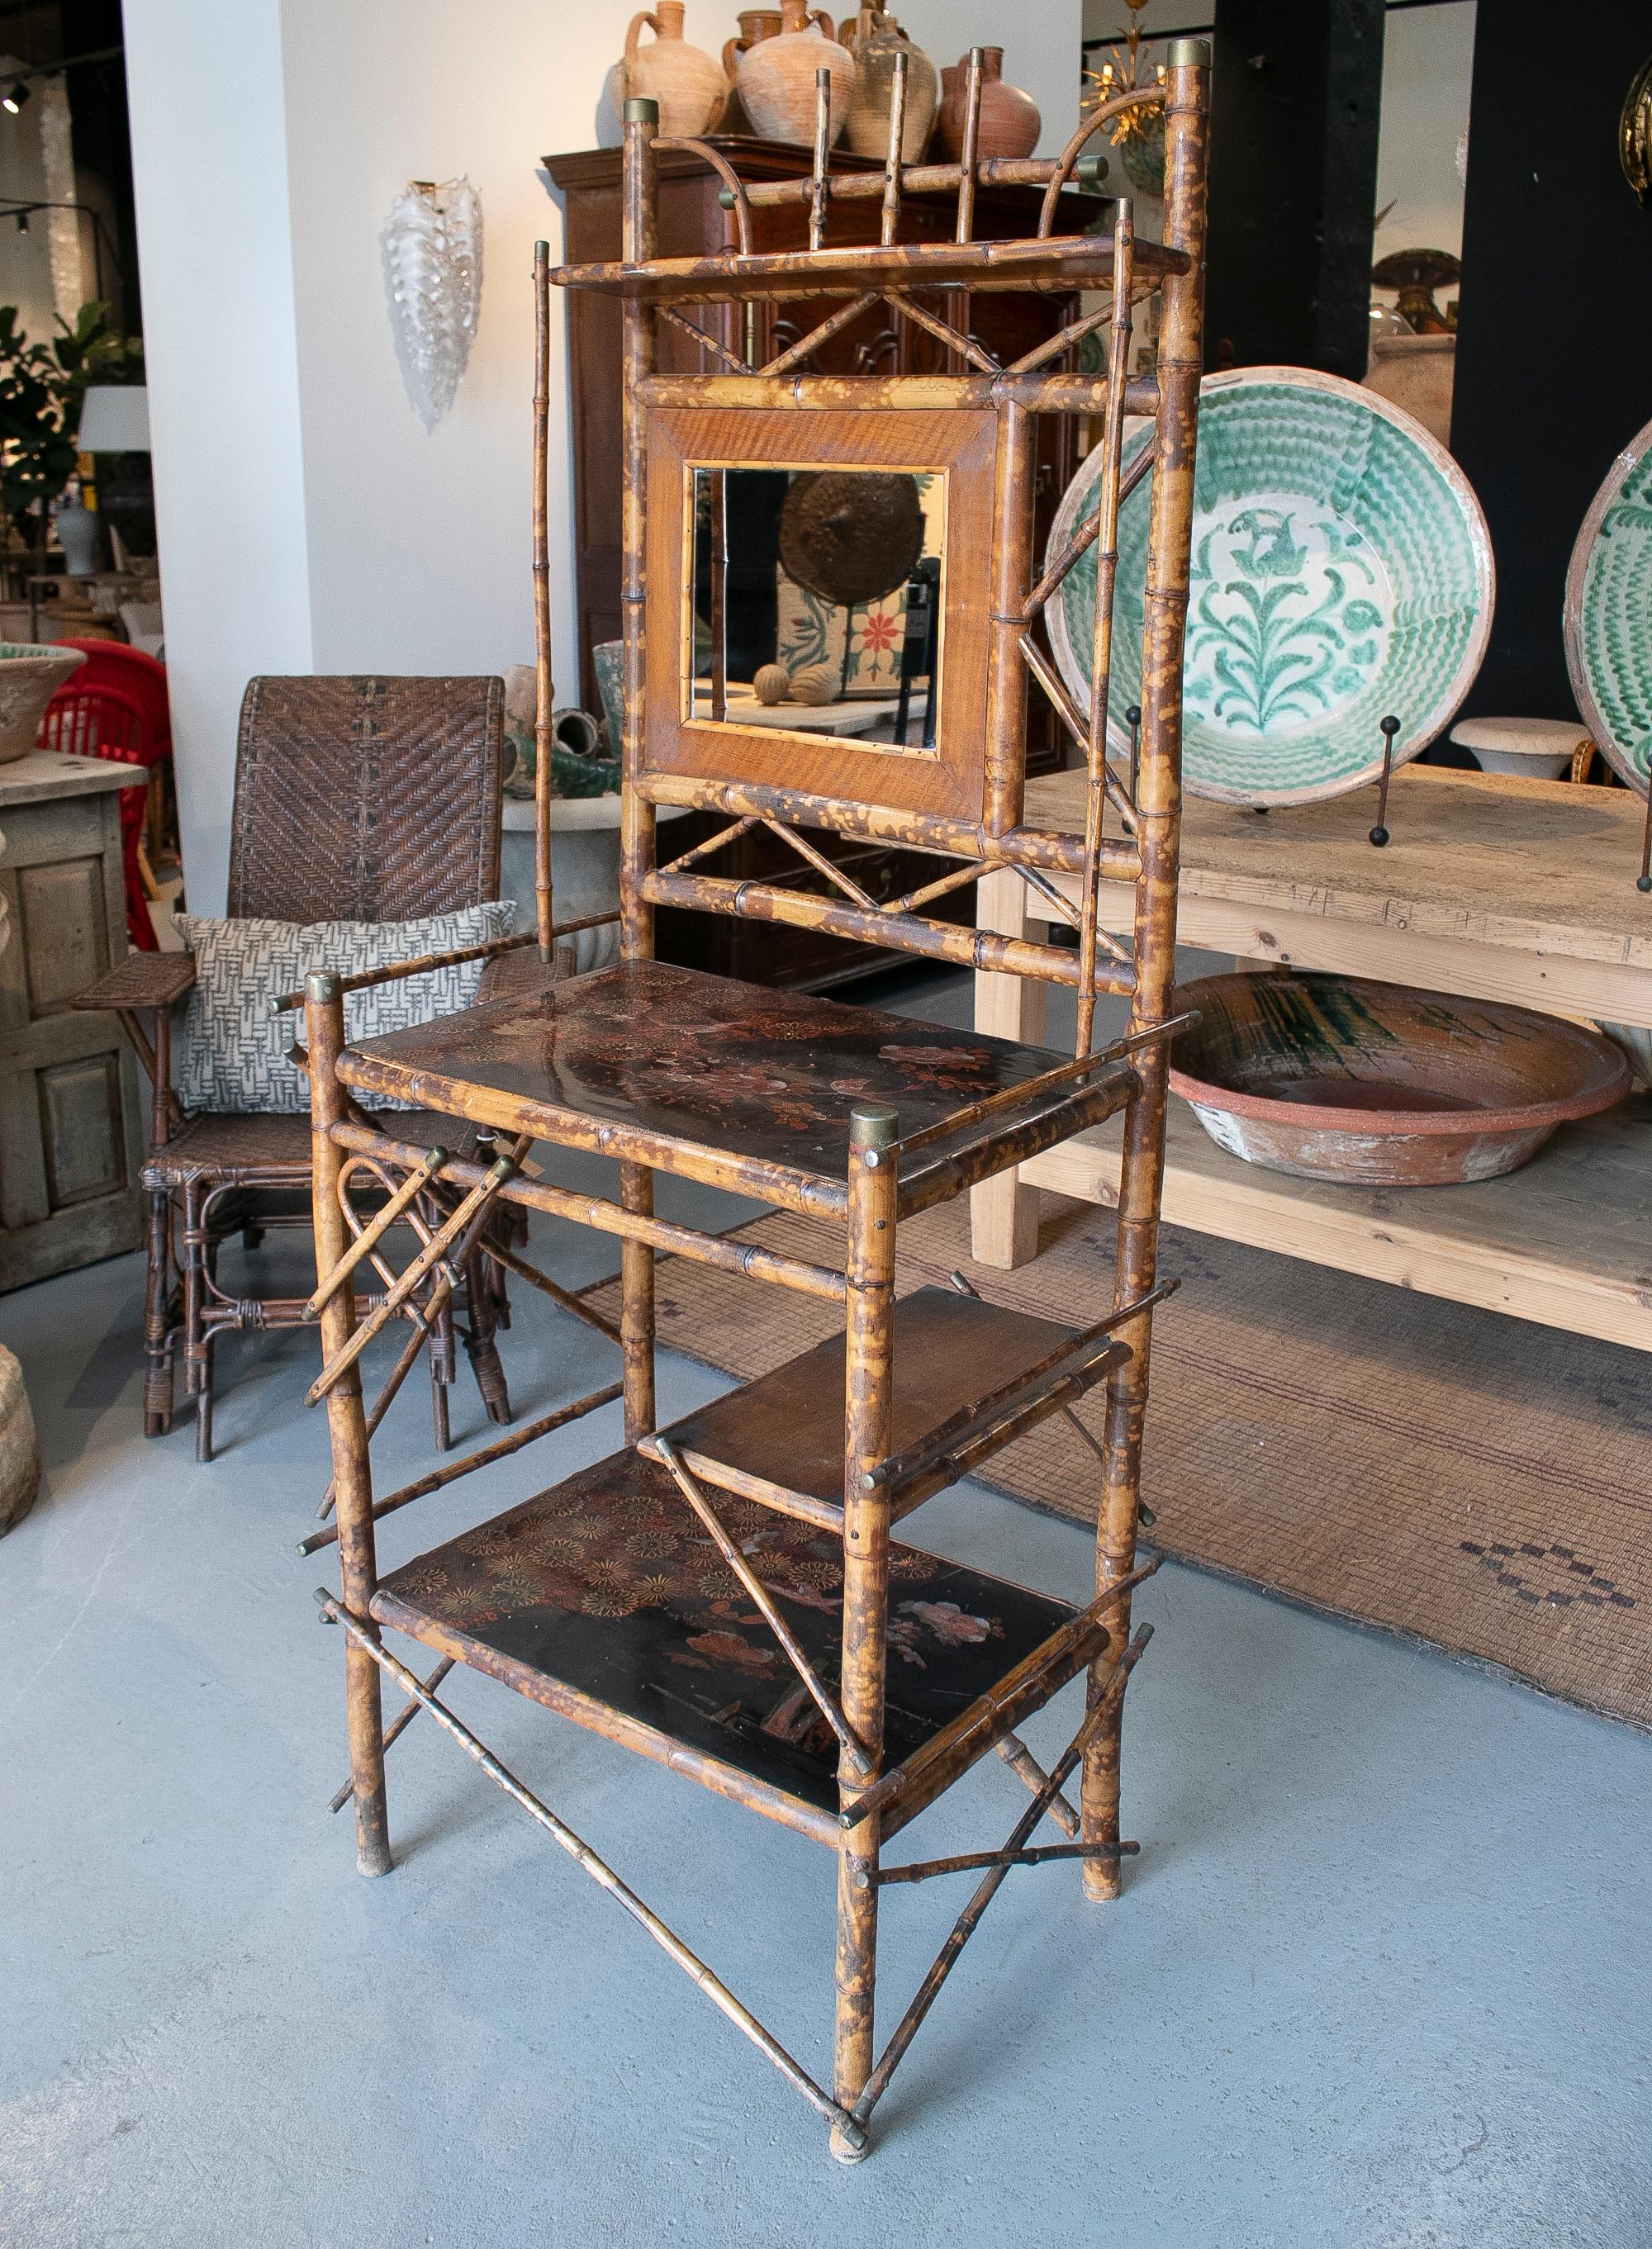 Antique 19th century Philippine lacquered bamboo and bronze dressing table with mirror.